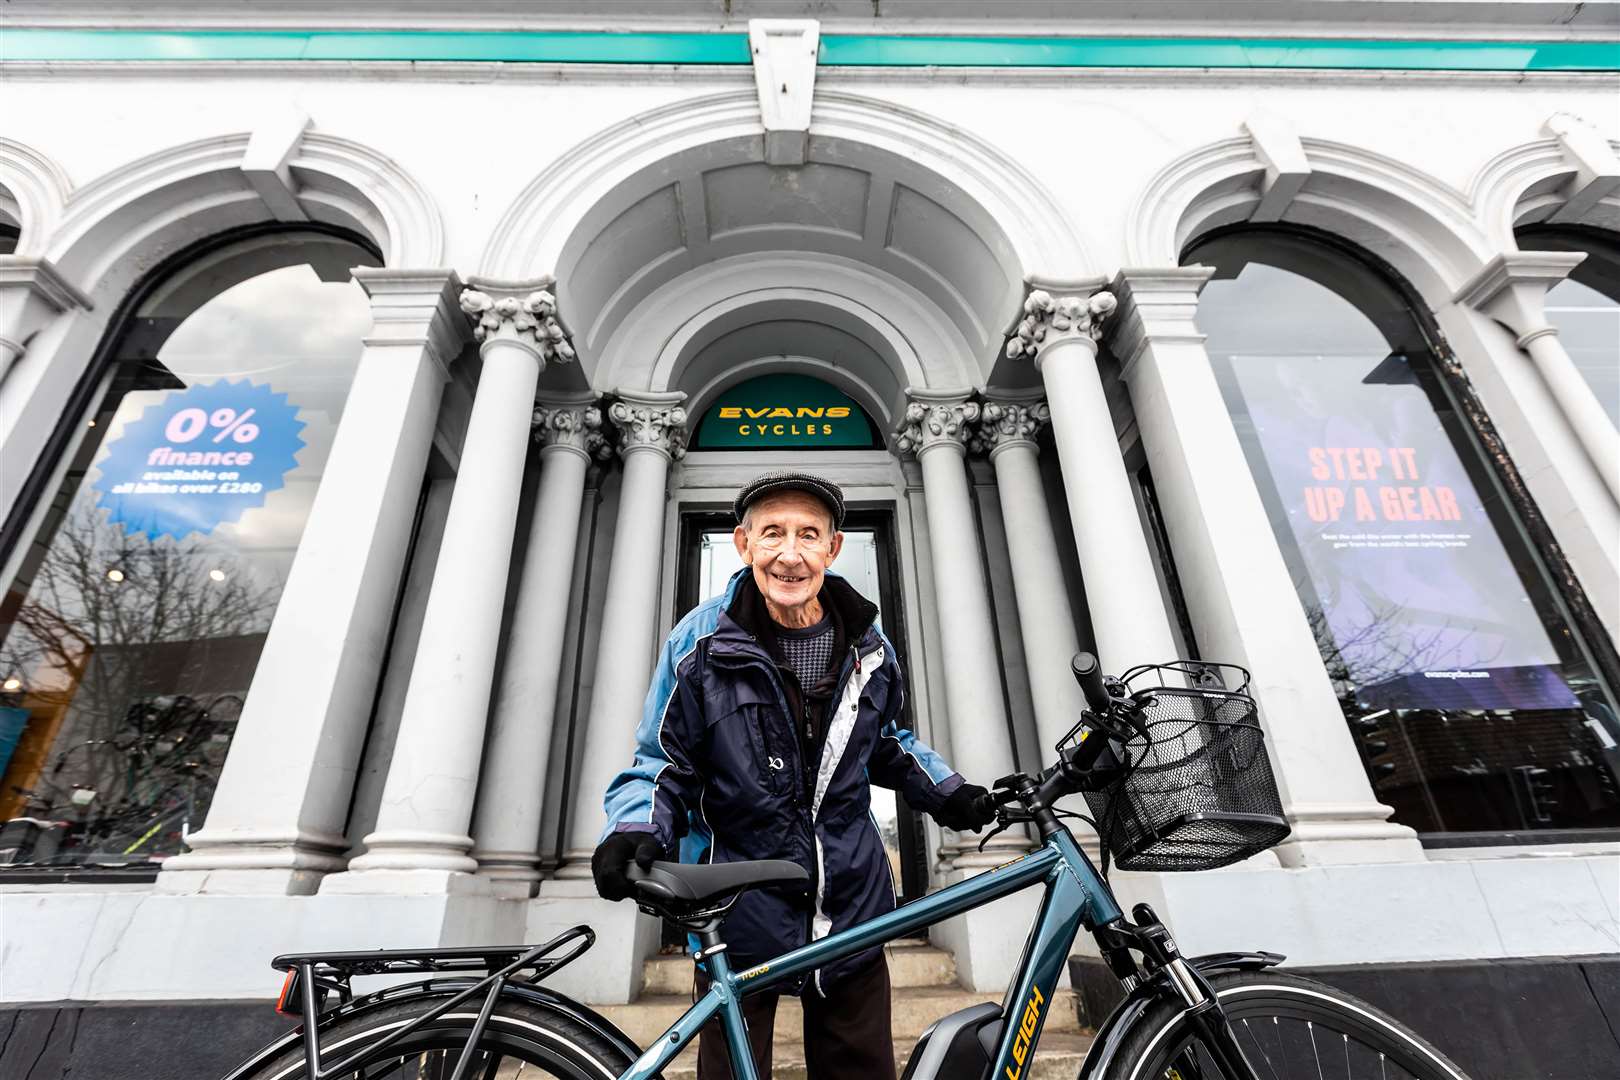 Mr Bailey picked up the bike from his local Evans Cycles store in Maidstone (Raleigh/Evans Cycles/PA)